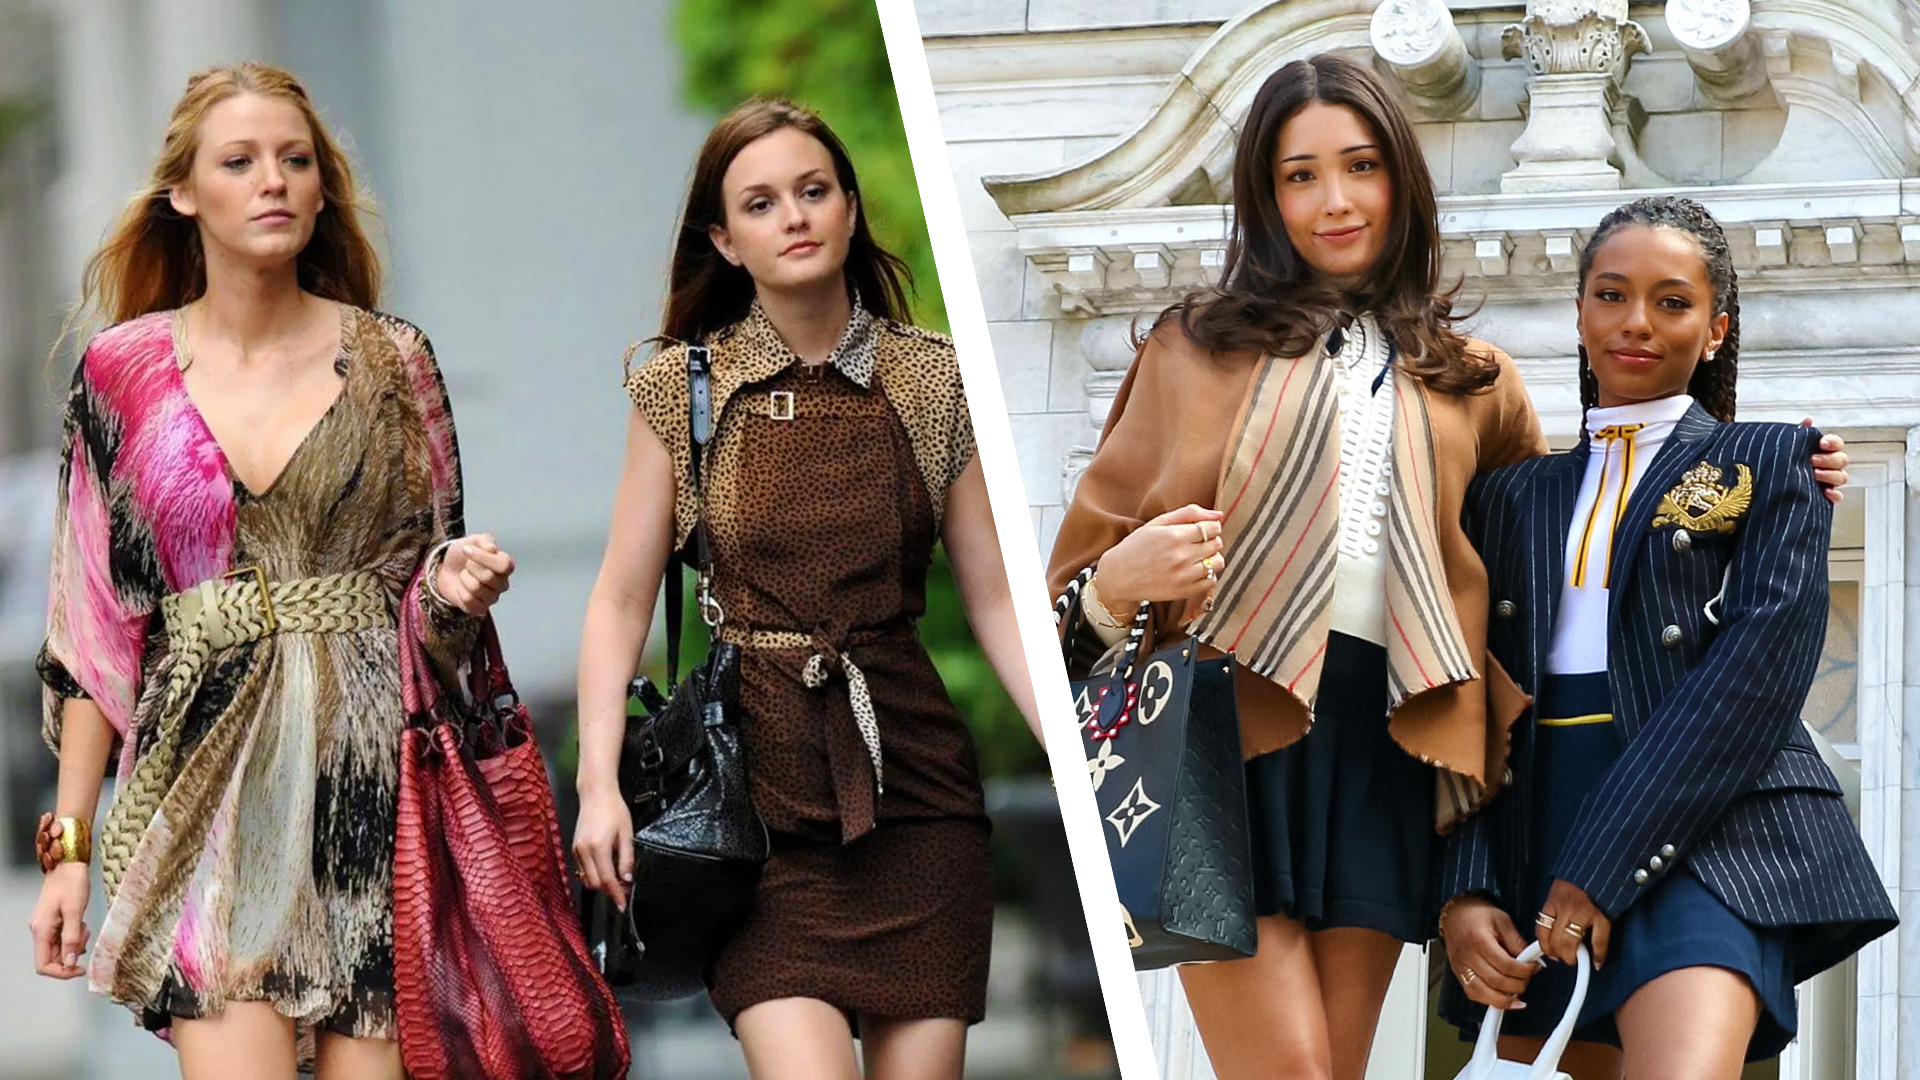 https://www.datocms-assets.com/109366/1698784475-the-fashion-on-the-gossip-girl-reboot-pales-in-comparison-to-the-original.png